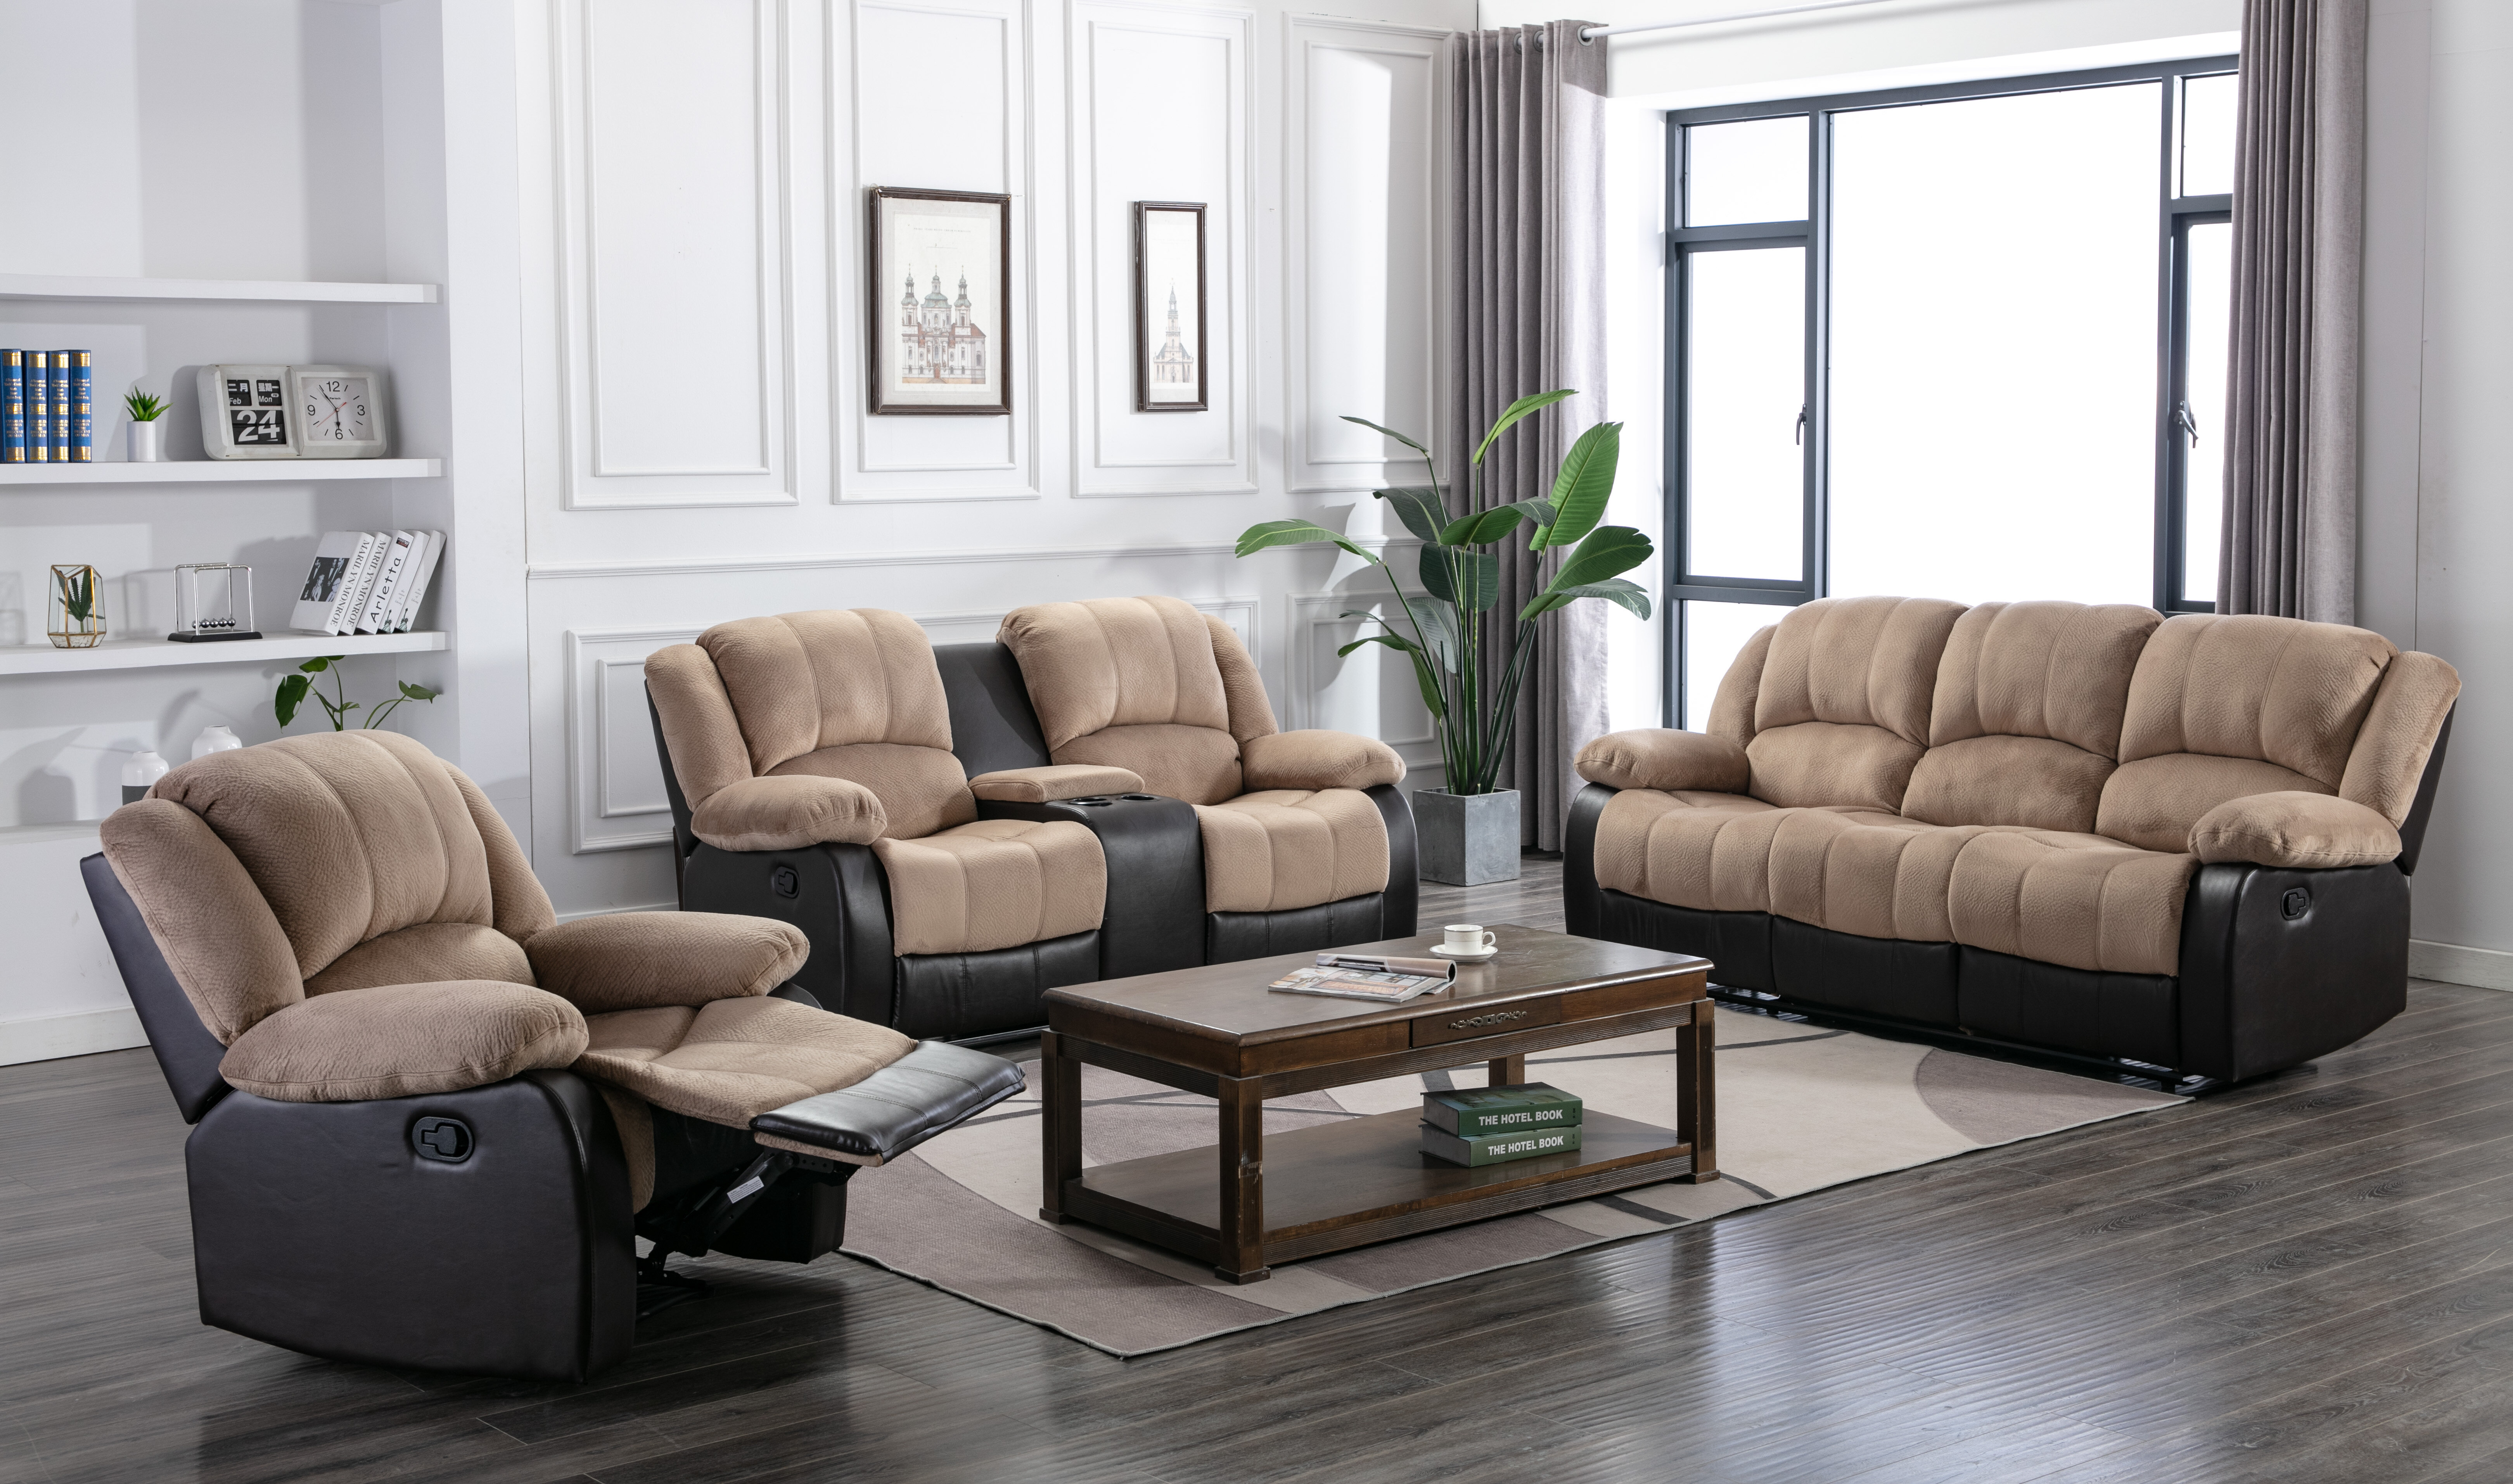 Montevallo 3 Piece Leather Match Reclining Living Room Set